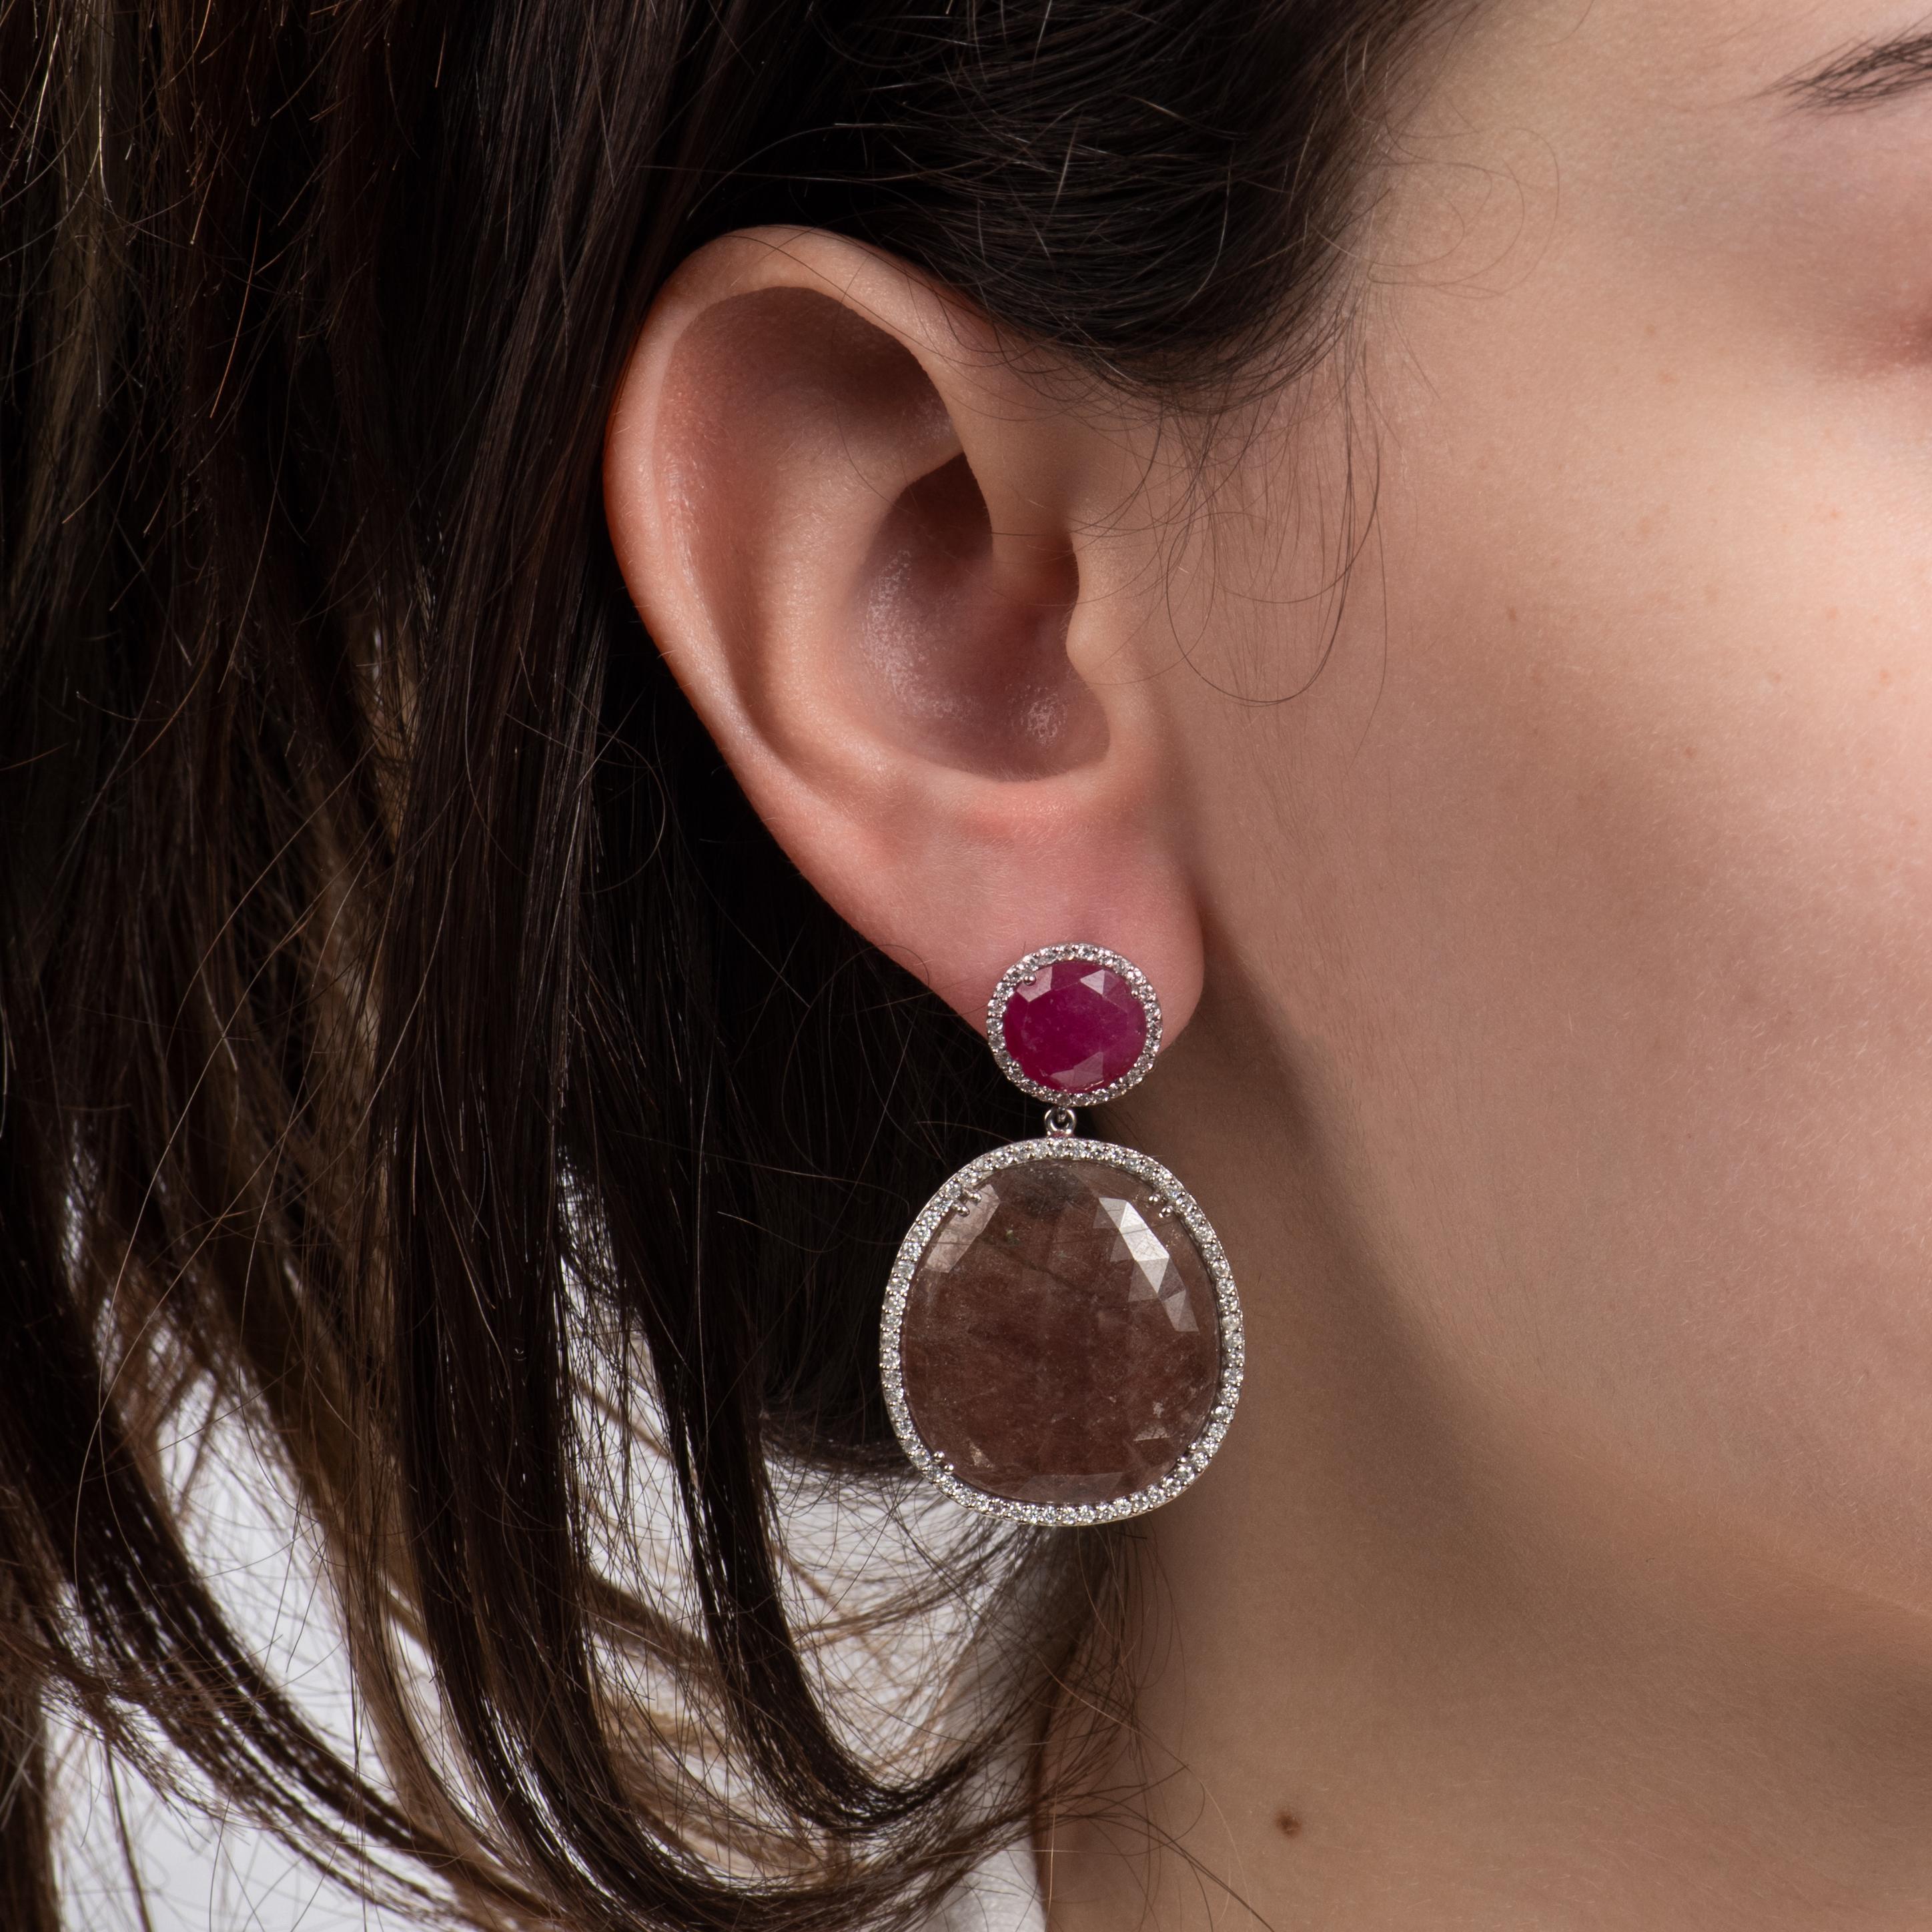 These unique earrings feature some incredible, faceted sapphire and ruby slices, surrounded by round diamond halos. The bottom sapphires are approximately 22.67mm x 24.66mm, and the top rubies are approximately 9.91mm x 9.93mm. The diamond halos are